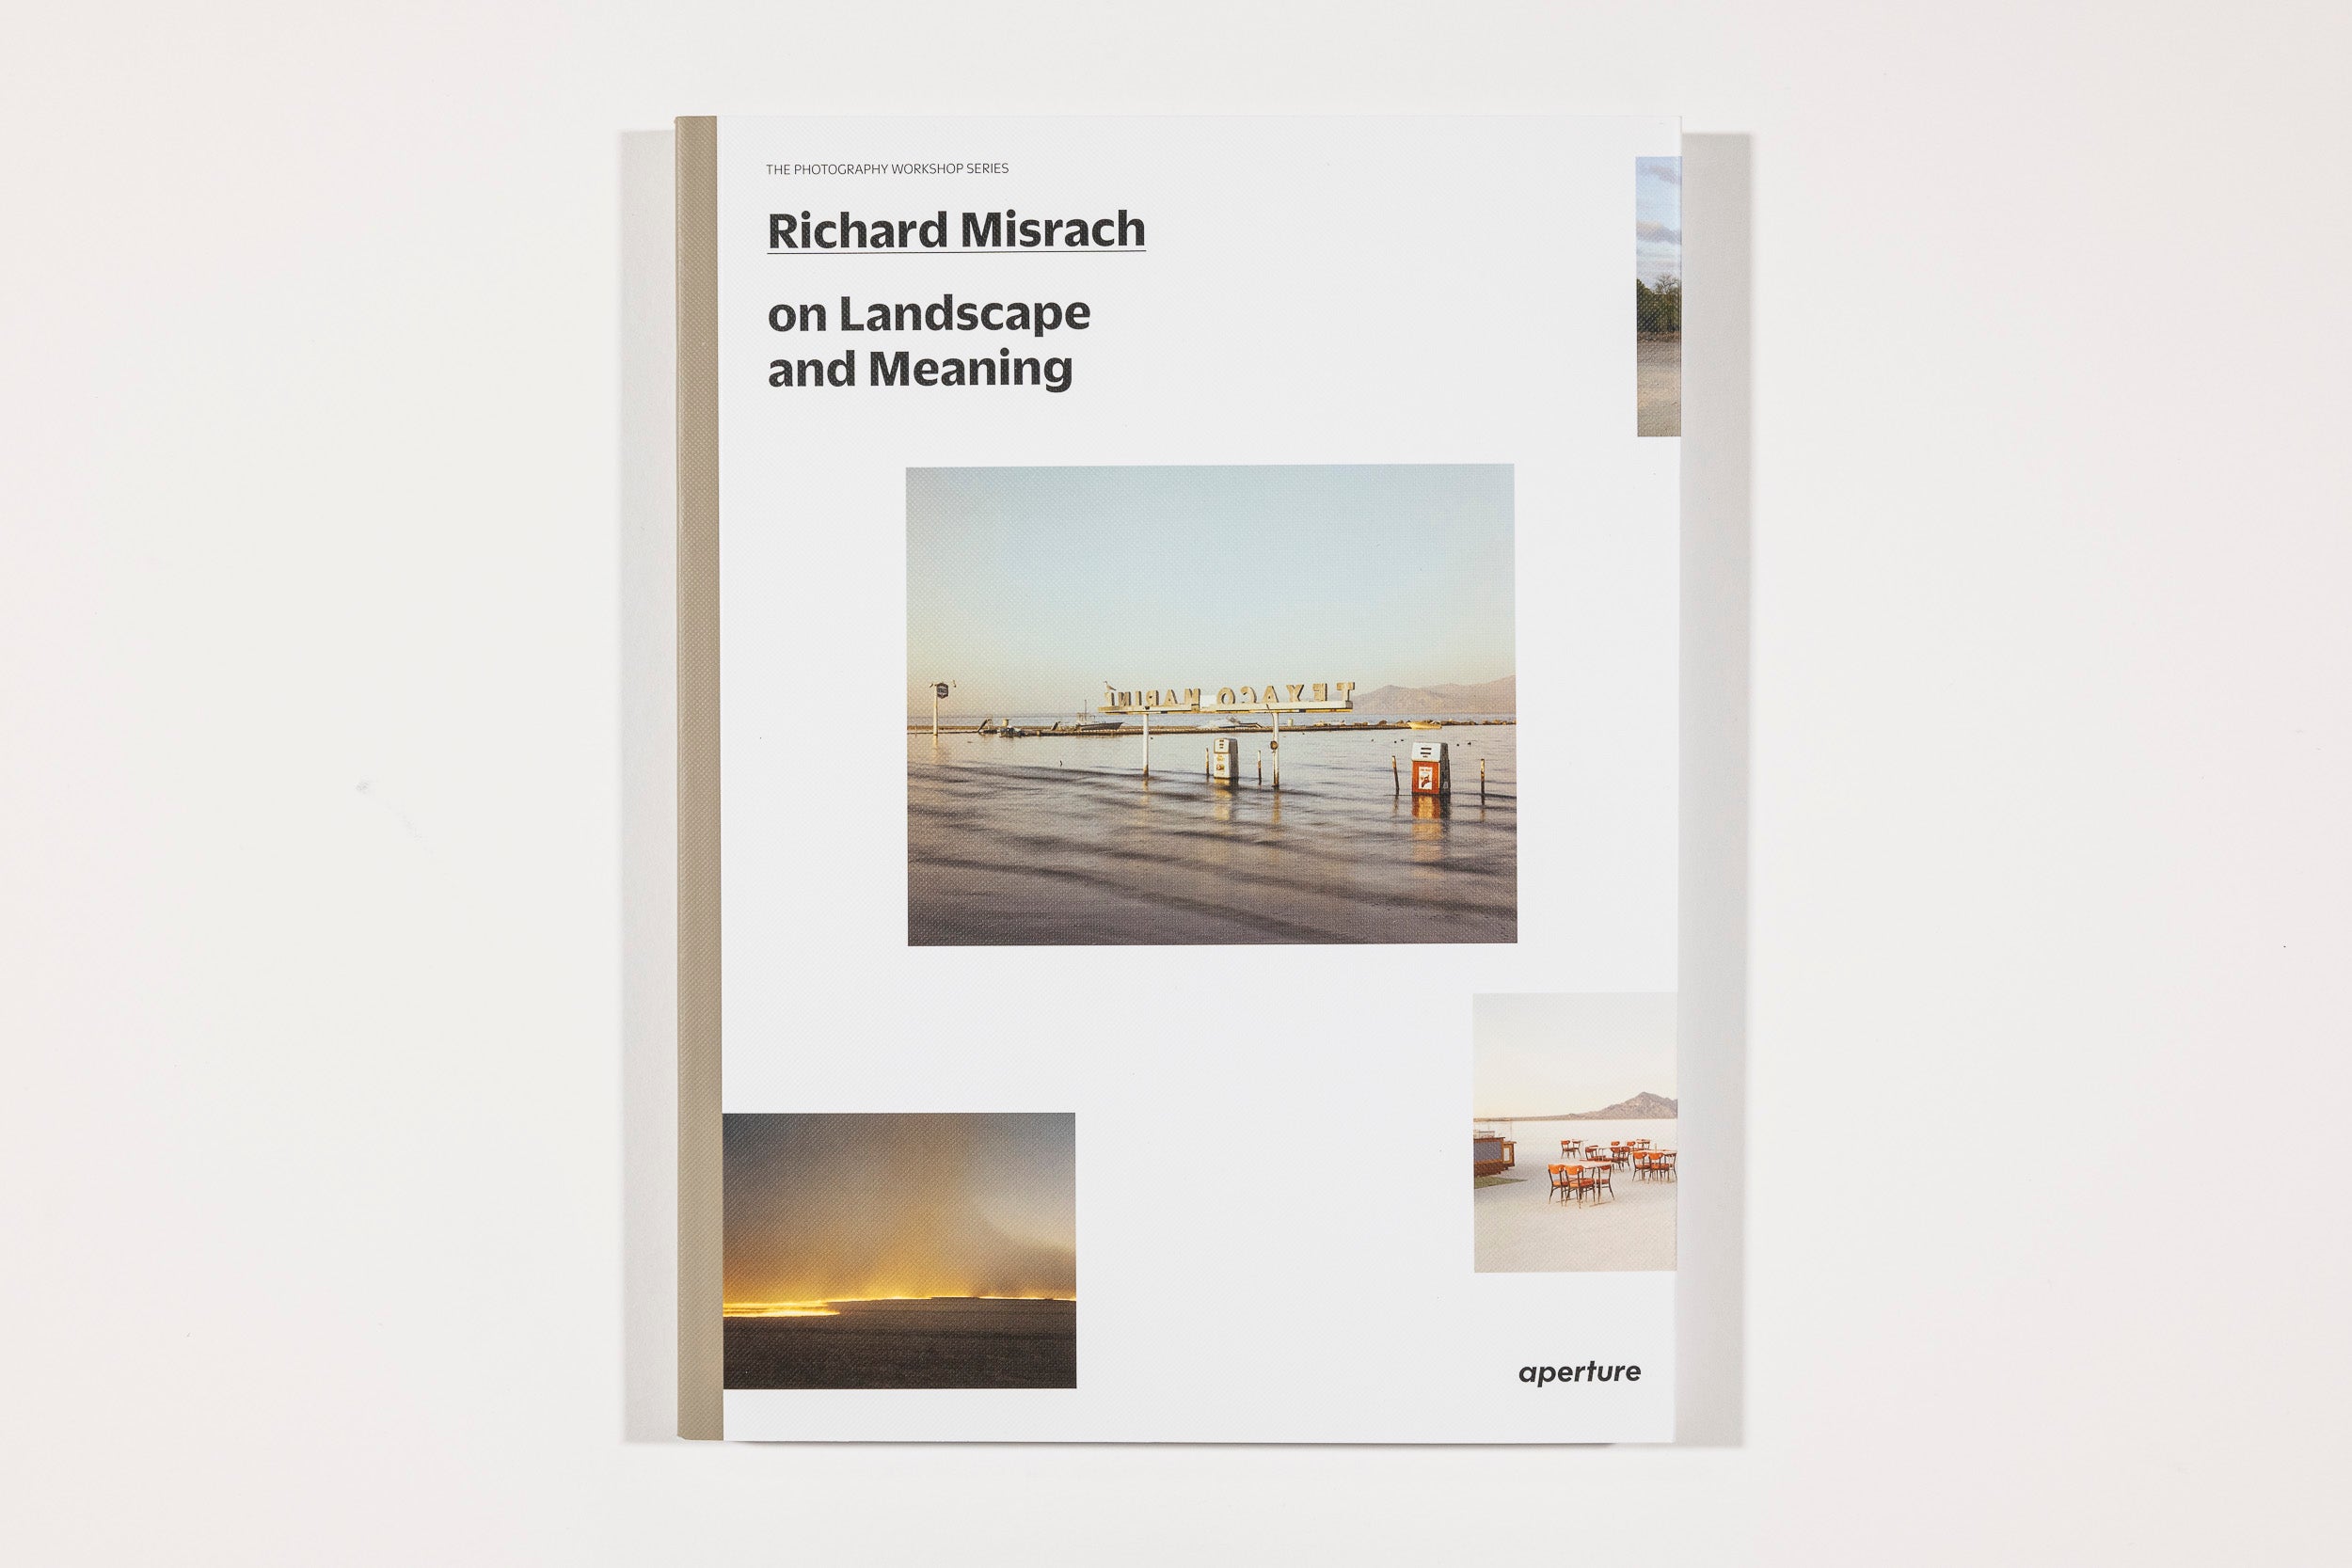 On Landscape and Meaning - Richard Misrach